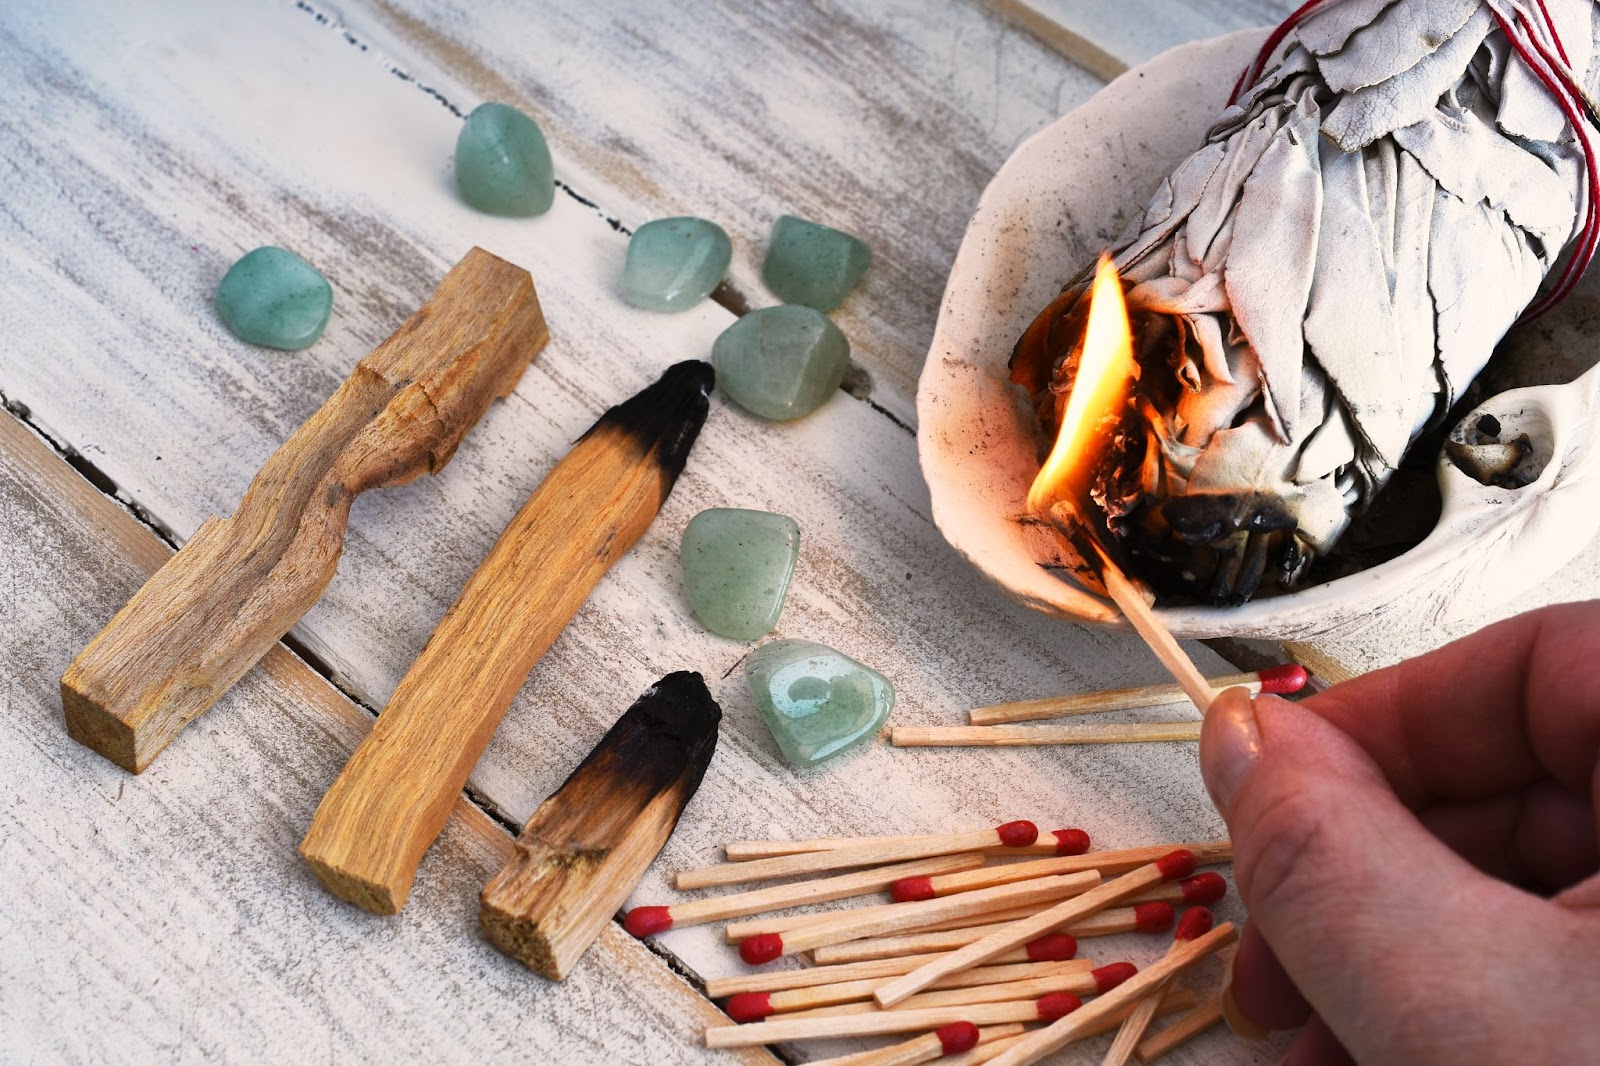 Green crystals next to a stick of sage and sticks of palo santo with a hand holding a lit flame.